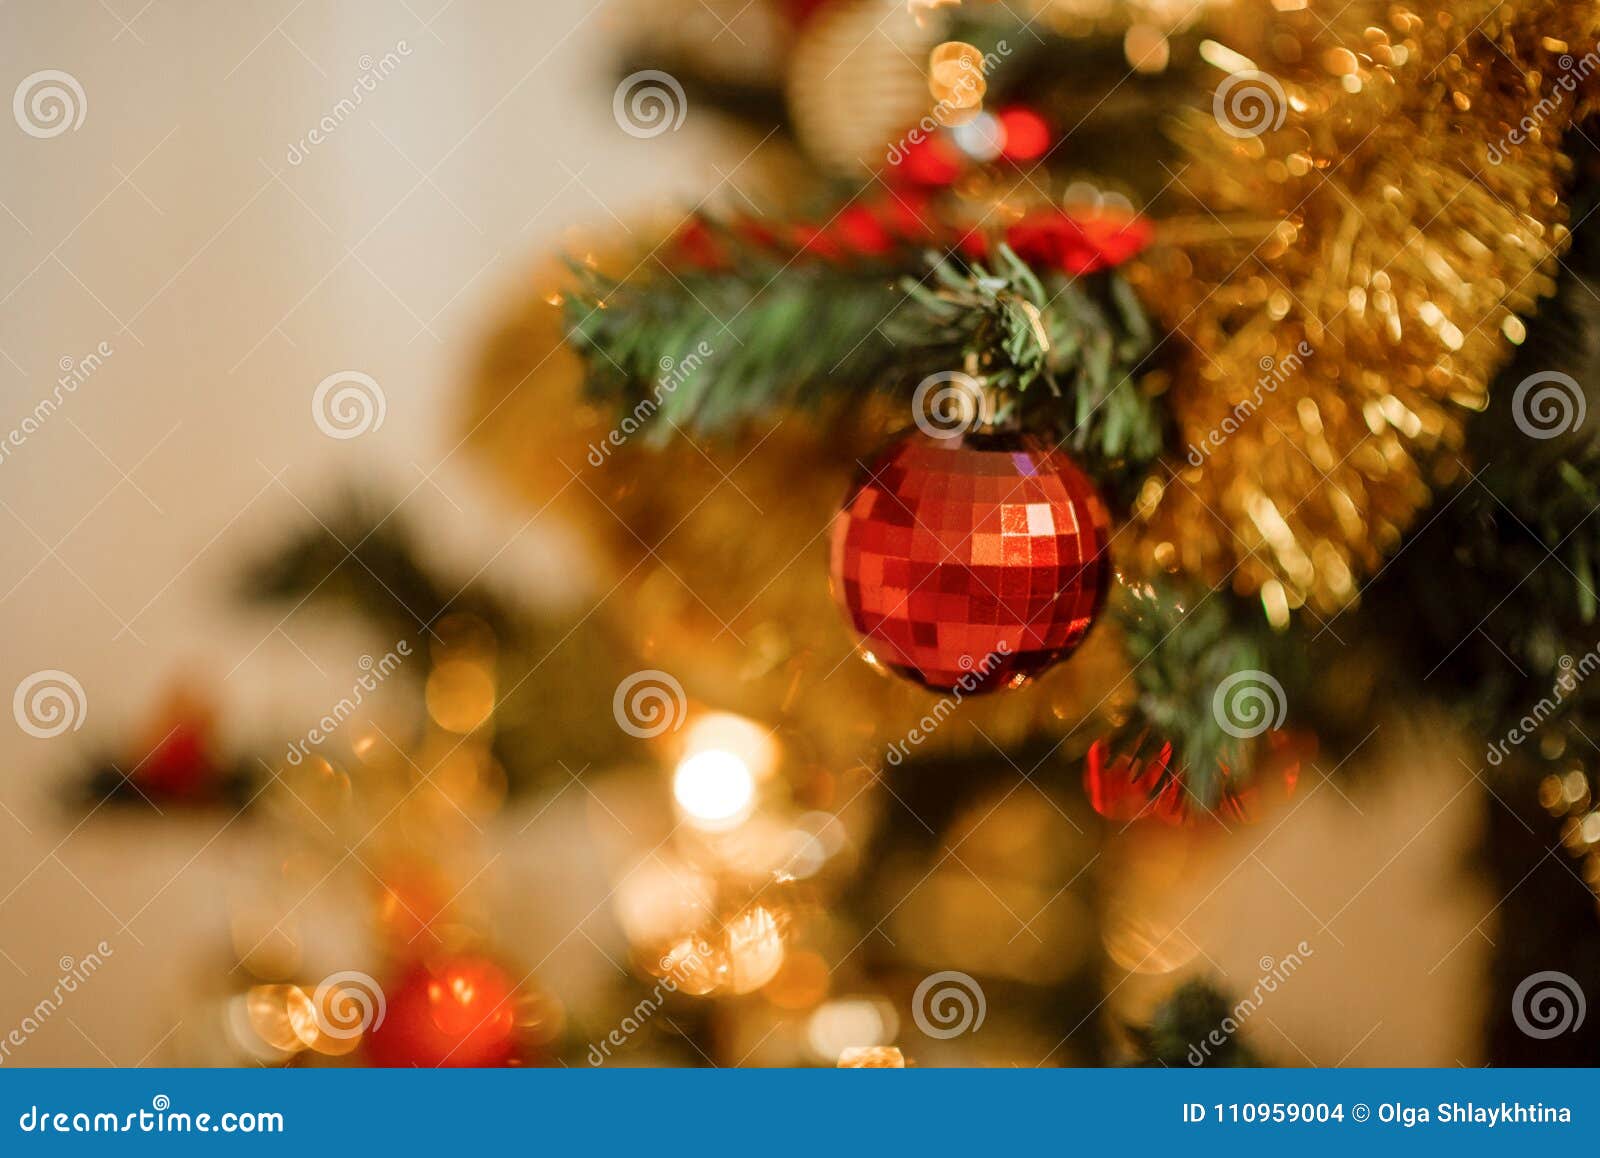 Christmas Tree Gold Decorations and Garland Stock Photo - Image of ...